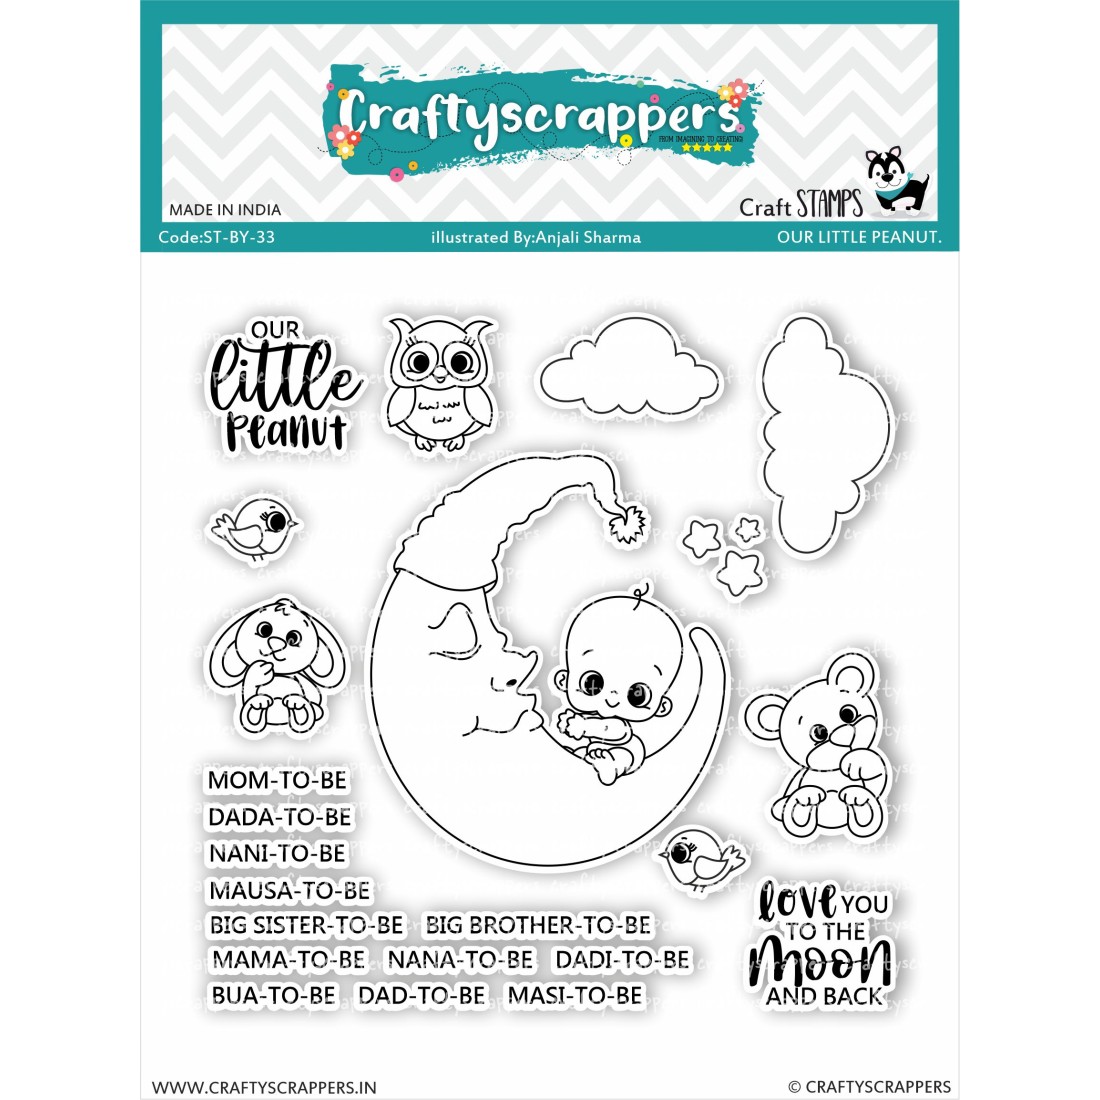 Craftyscrappers Stamps- OUR LITTLE PEANUT